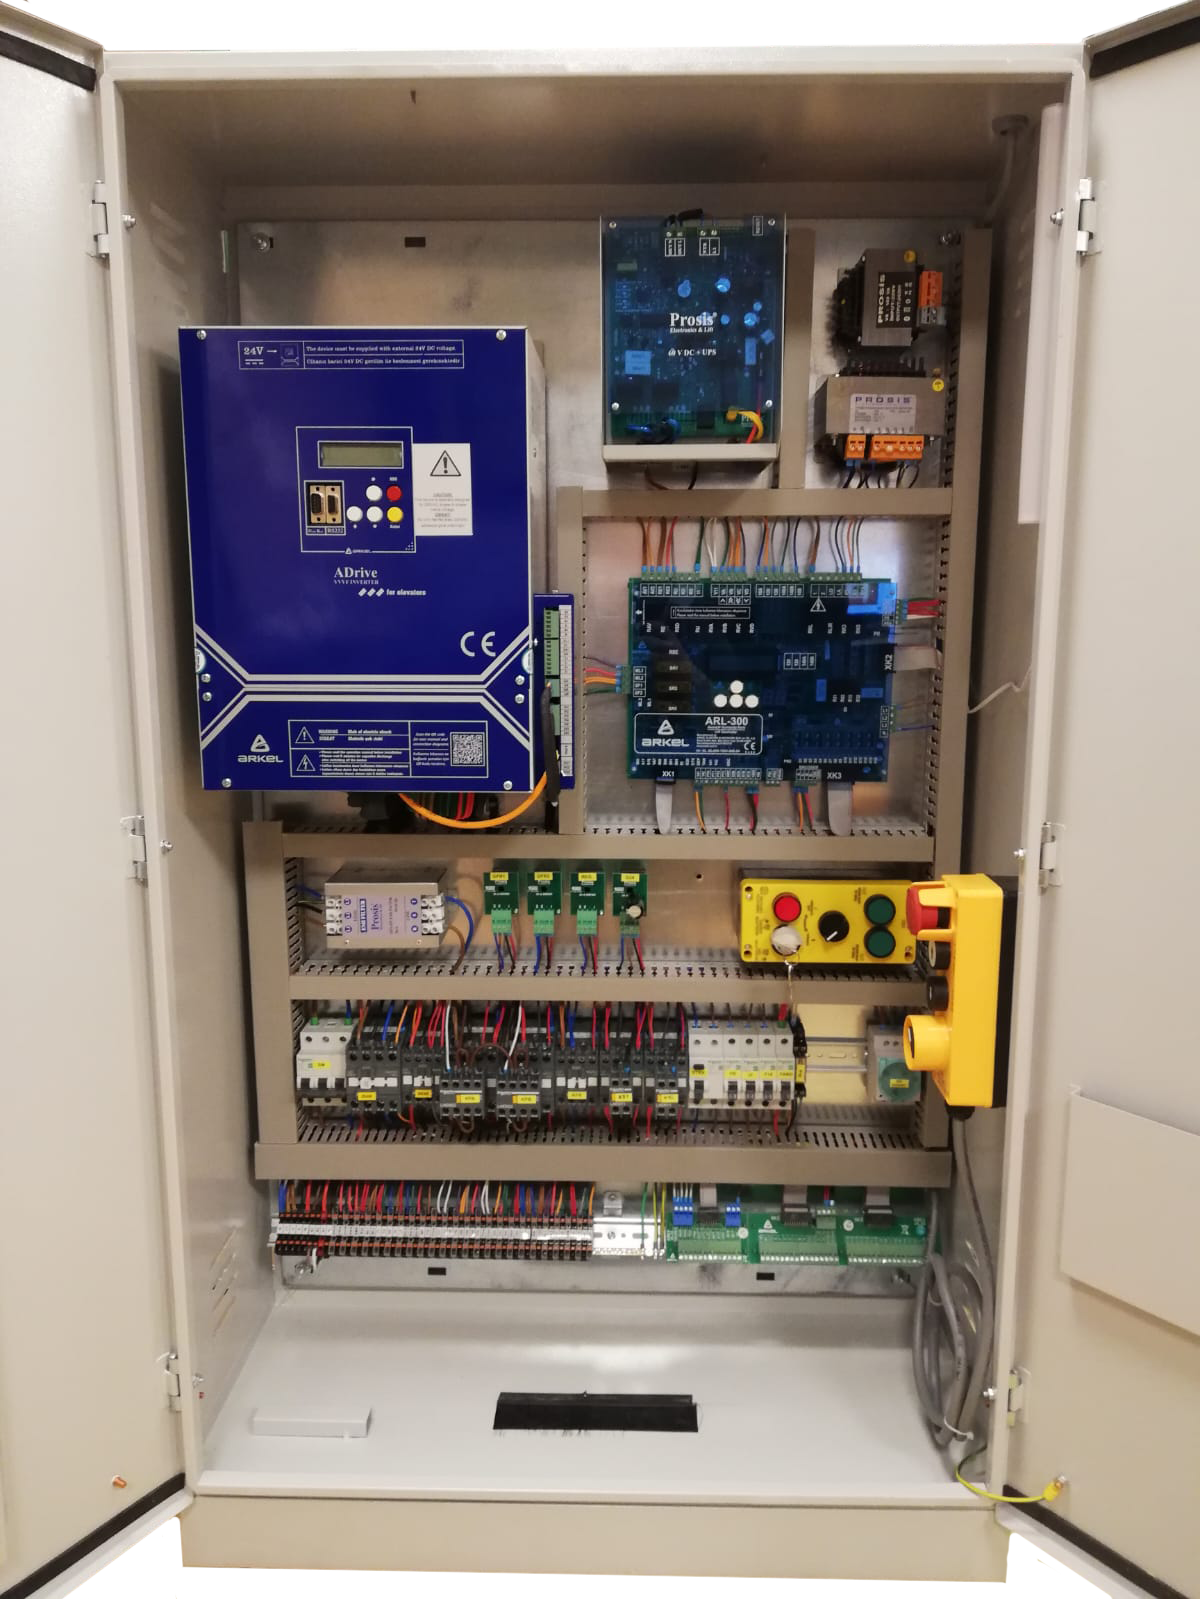 7,5 kW ADRIVE + ARL 300 GEARLESS-SYNCHRONOUS-MR-A3-BATTERY RESCUE CONTROL PANEL